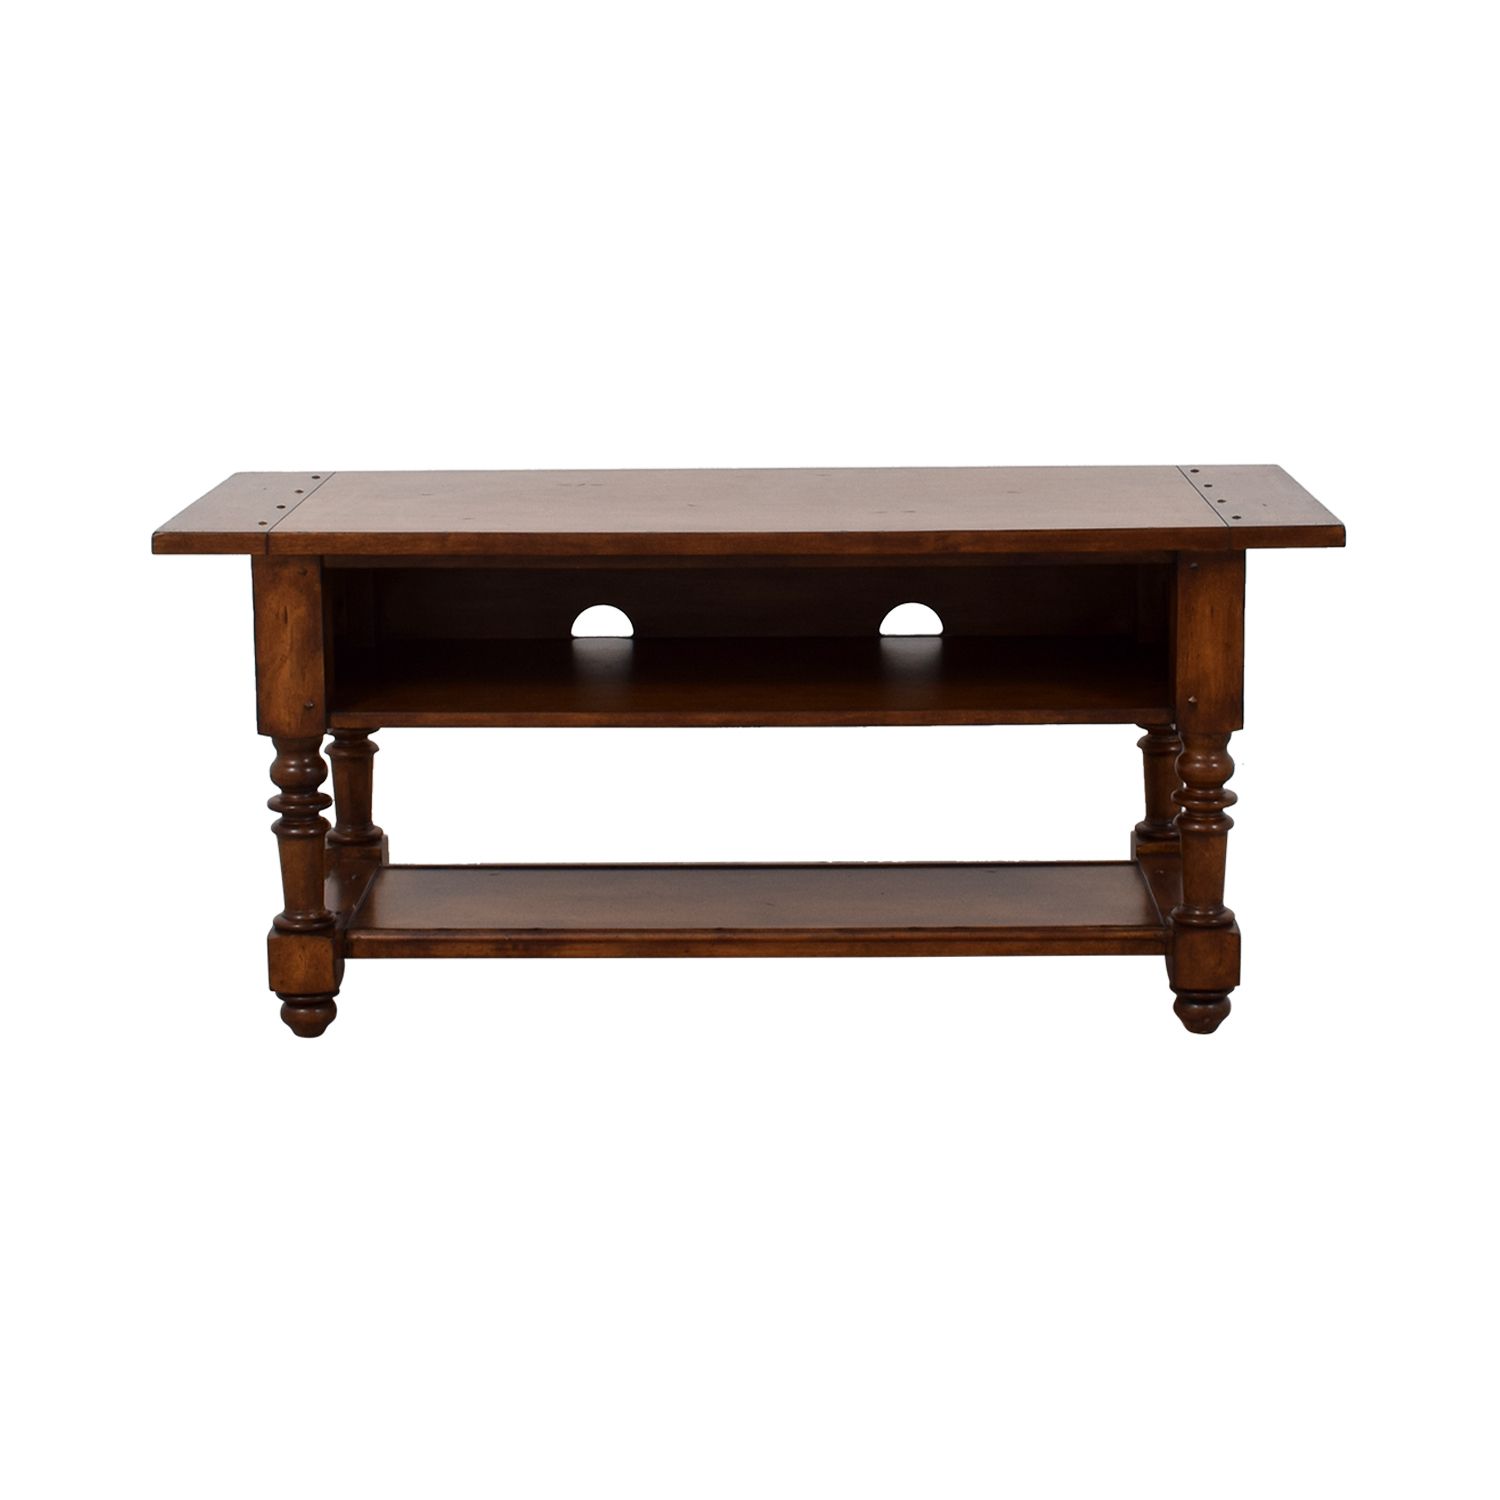 [%90% Off – Pottery Barn Pottery Barn Como Wood Tv Stand / Storage Within Preferred Como Tv Stands|como Tv Stands Intended For Favorite 90% Off – Pottery Barn Pottery Barn Como Wood Tv Stand / Storage|latest Como Tv Stands Pertaining To 90% Off – Pottery Barn Pottery Barn Como Wood Tv Stand / Storage|most Recently Released 90% Off – Pottery Barn Pottery Barn Como Wood Tv Stand / Storage In Como Tv Stands%] (View 4 of 20)